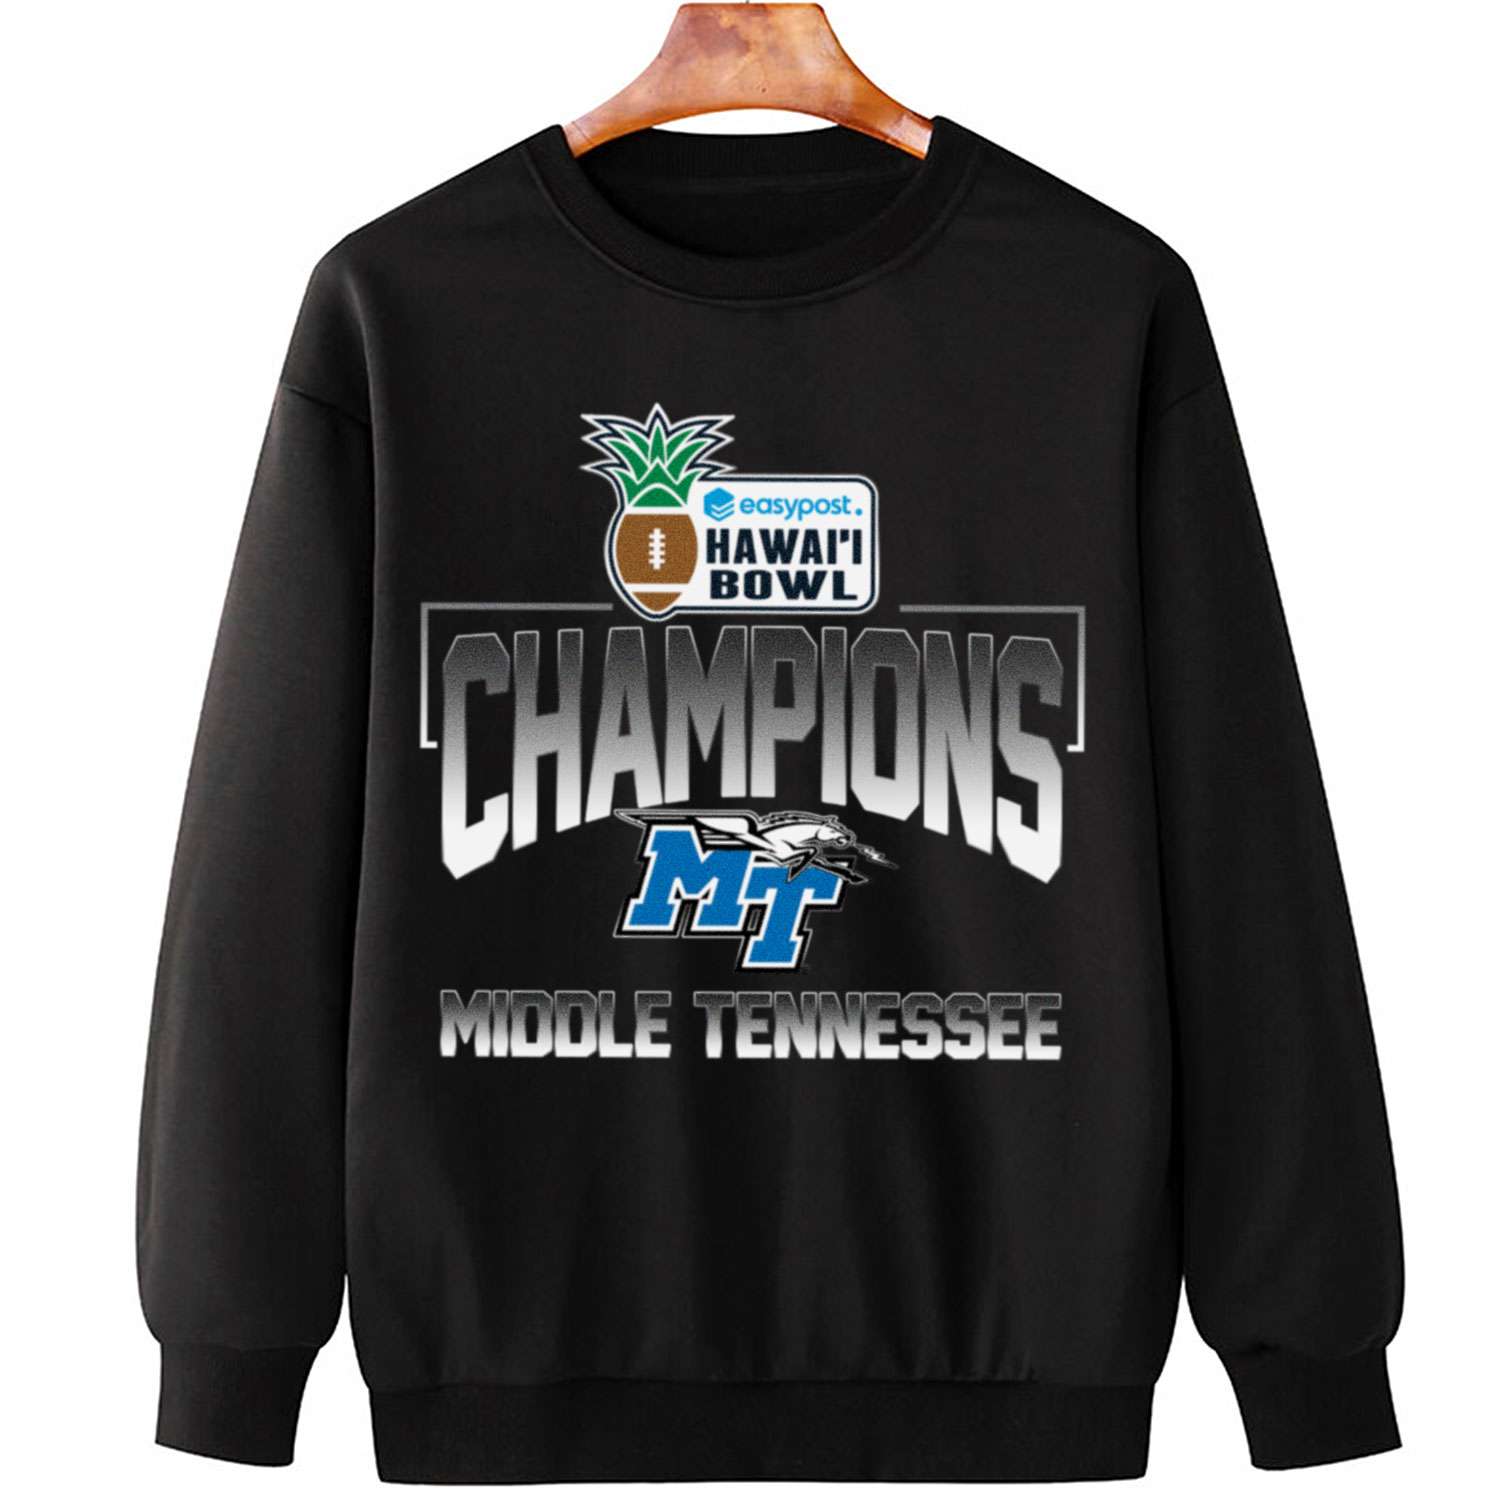 Middle Tennessee Hawaii bowl Champions T-Shirt